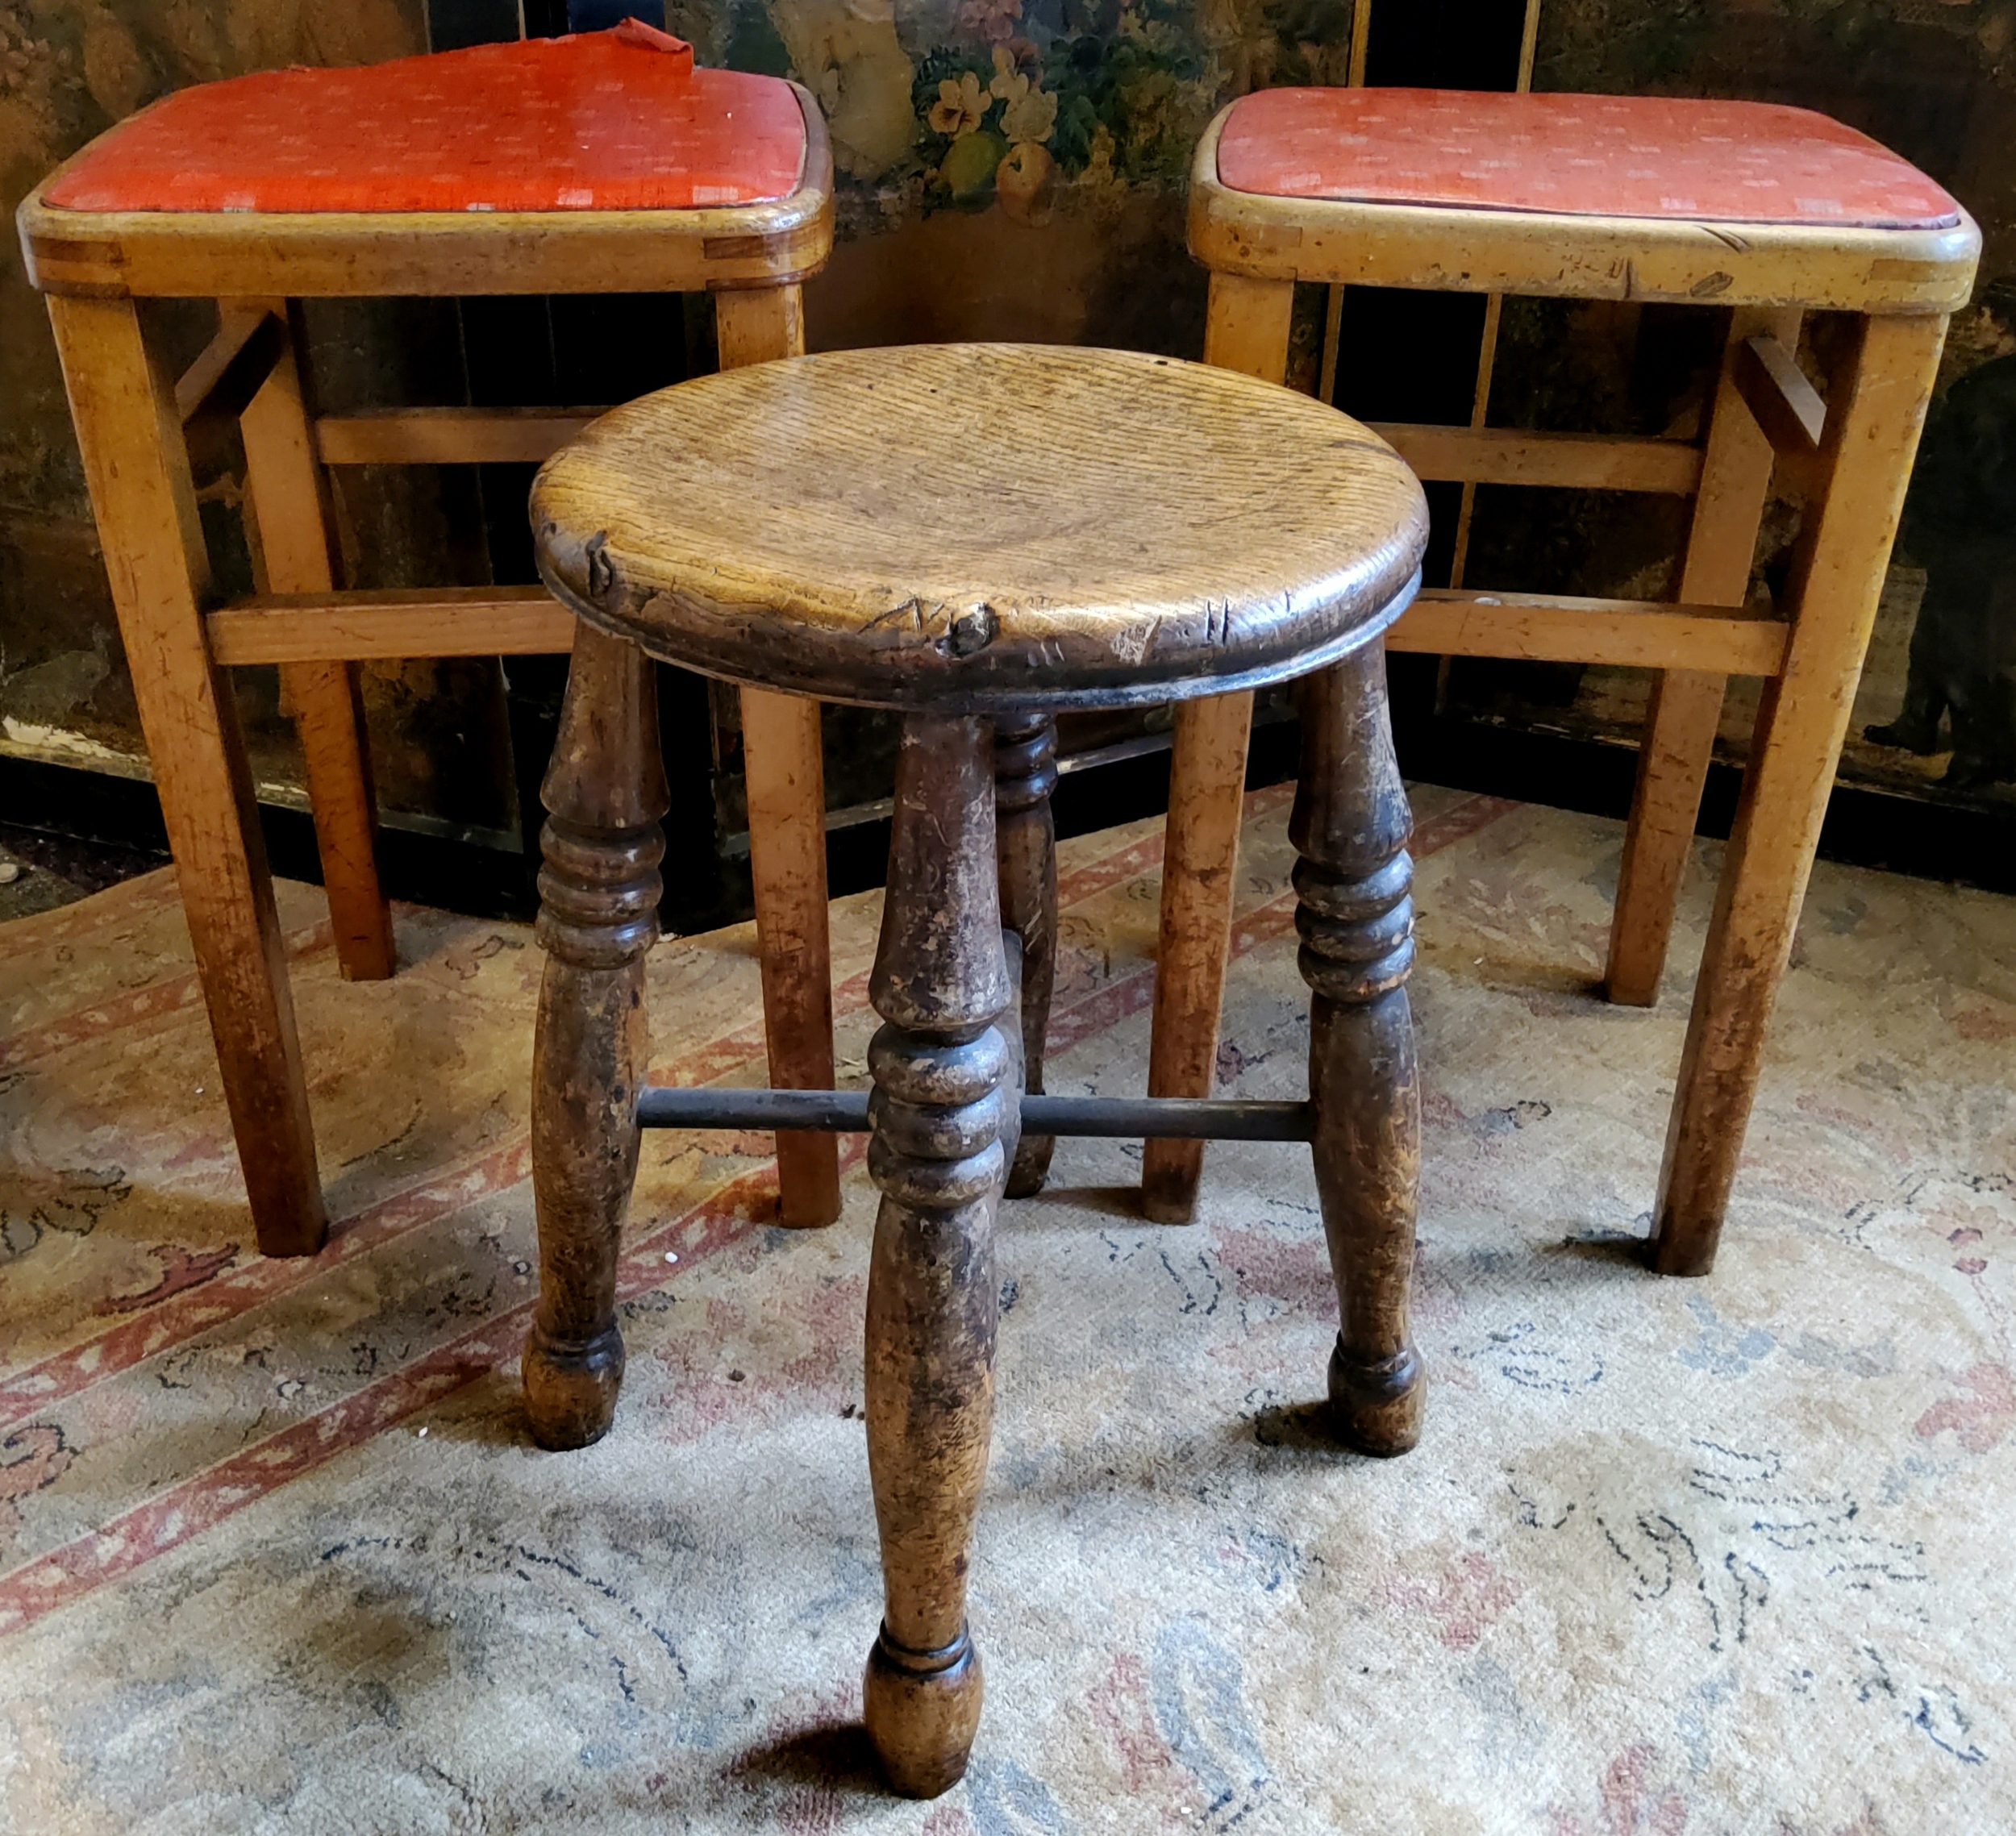 WITHDRAWN - 19th century elm and Ash workshop stool, well figured with X frame stretcher; a pair